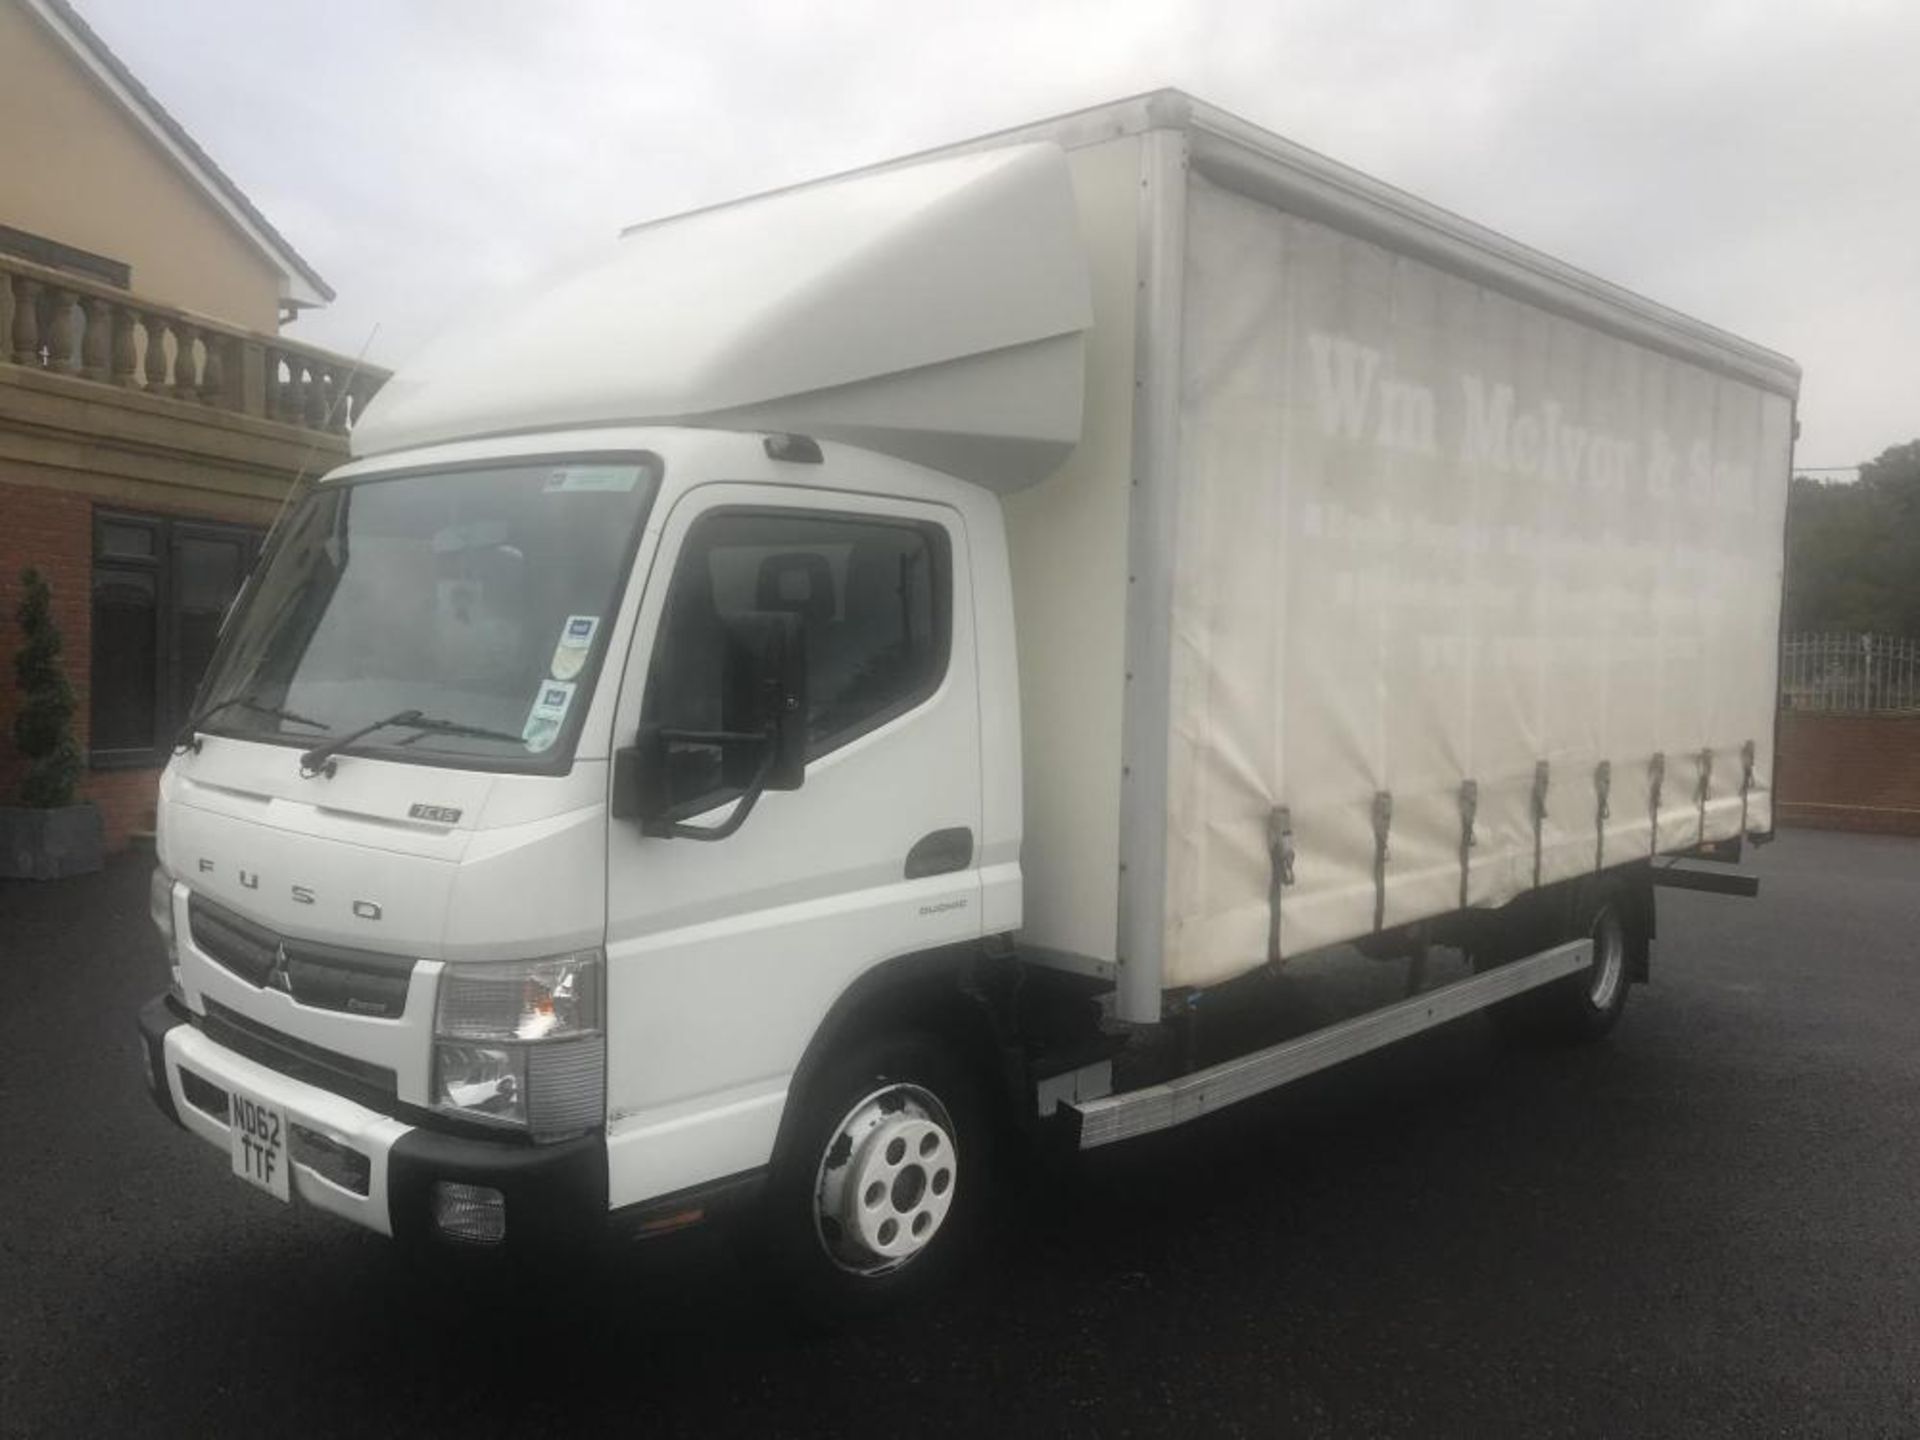 2013/62 REG MITSUBISHI FUSO CANTER 7C15 43 CURTAIN SIDE TRUCK 7.5 TON AUTO GEARBOX *PLUS VAT* - Image 2 of 14